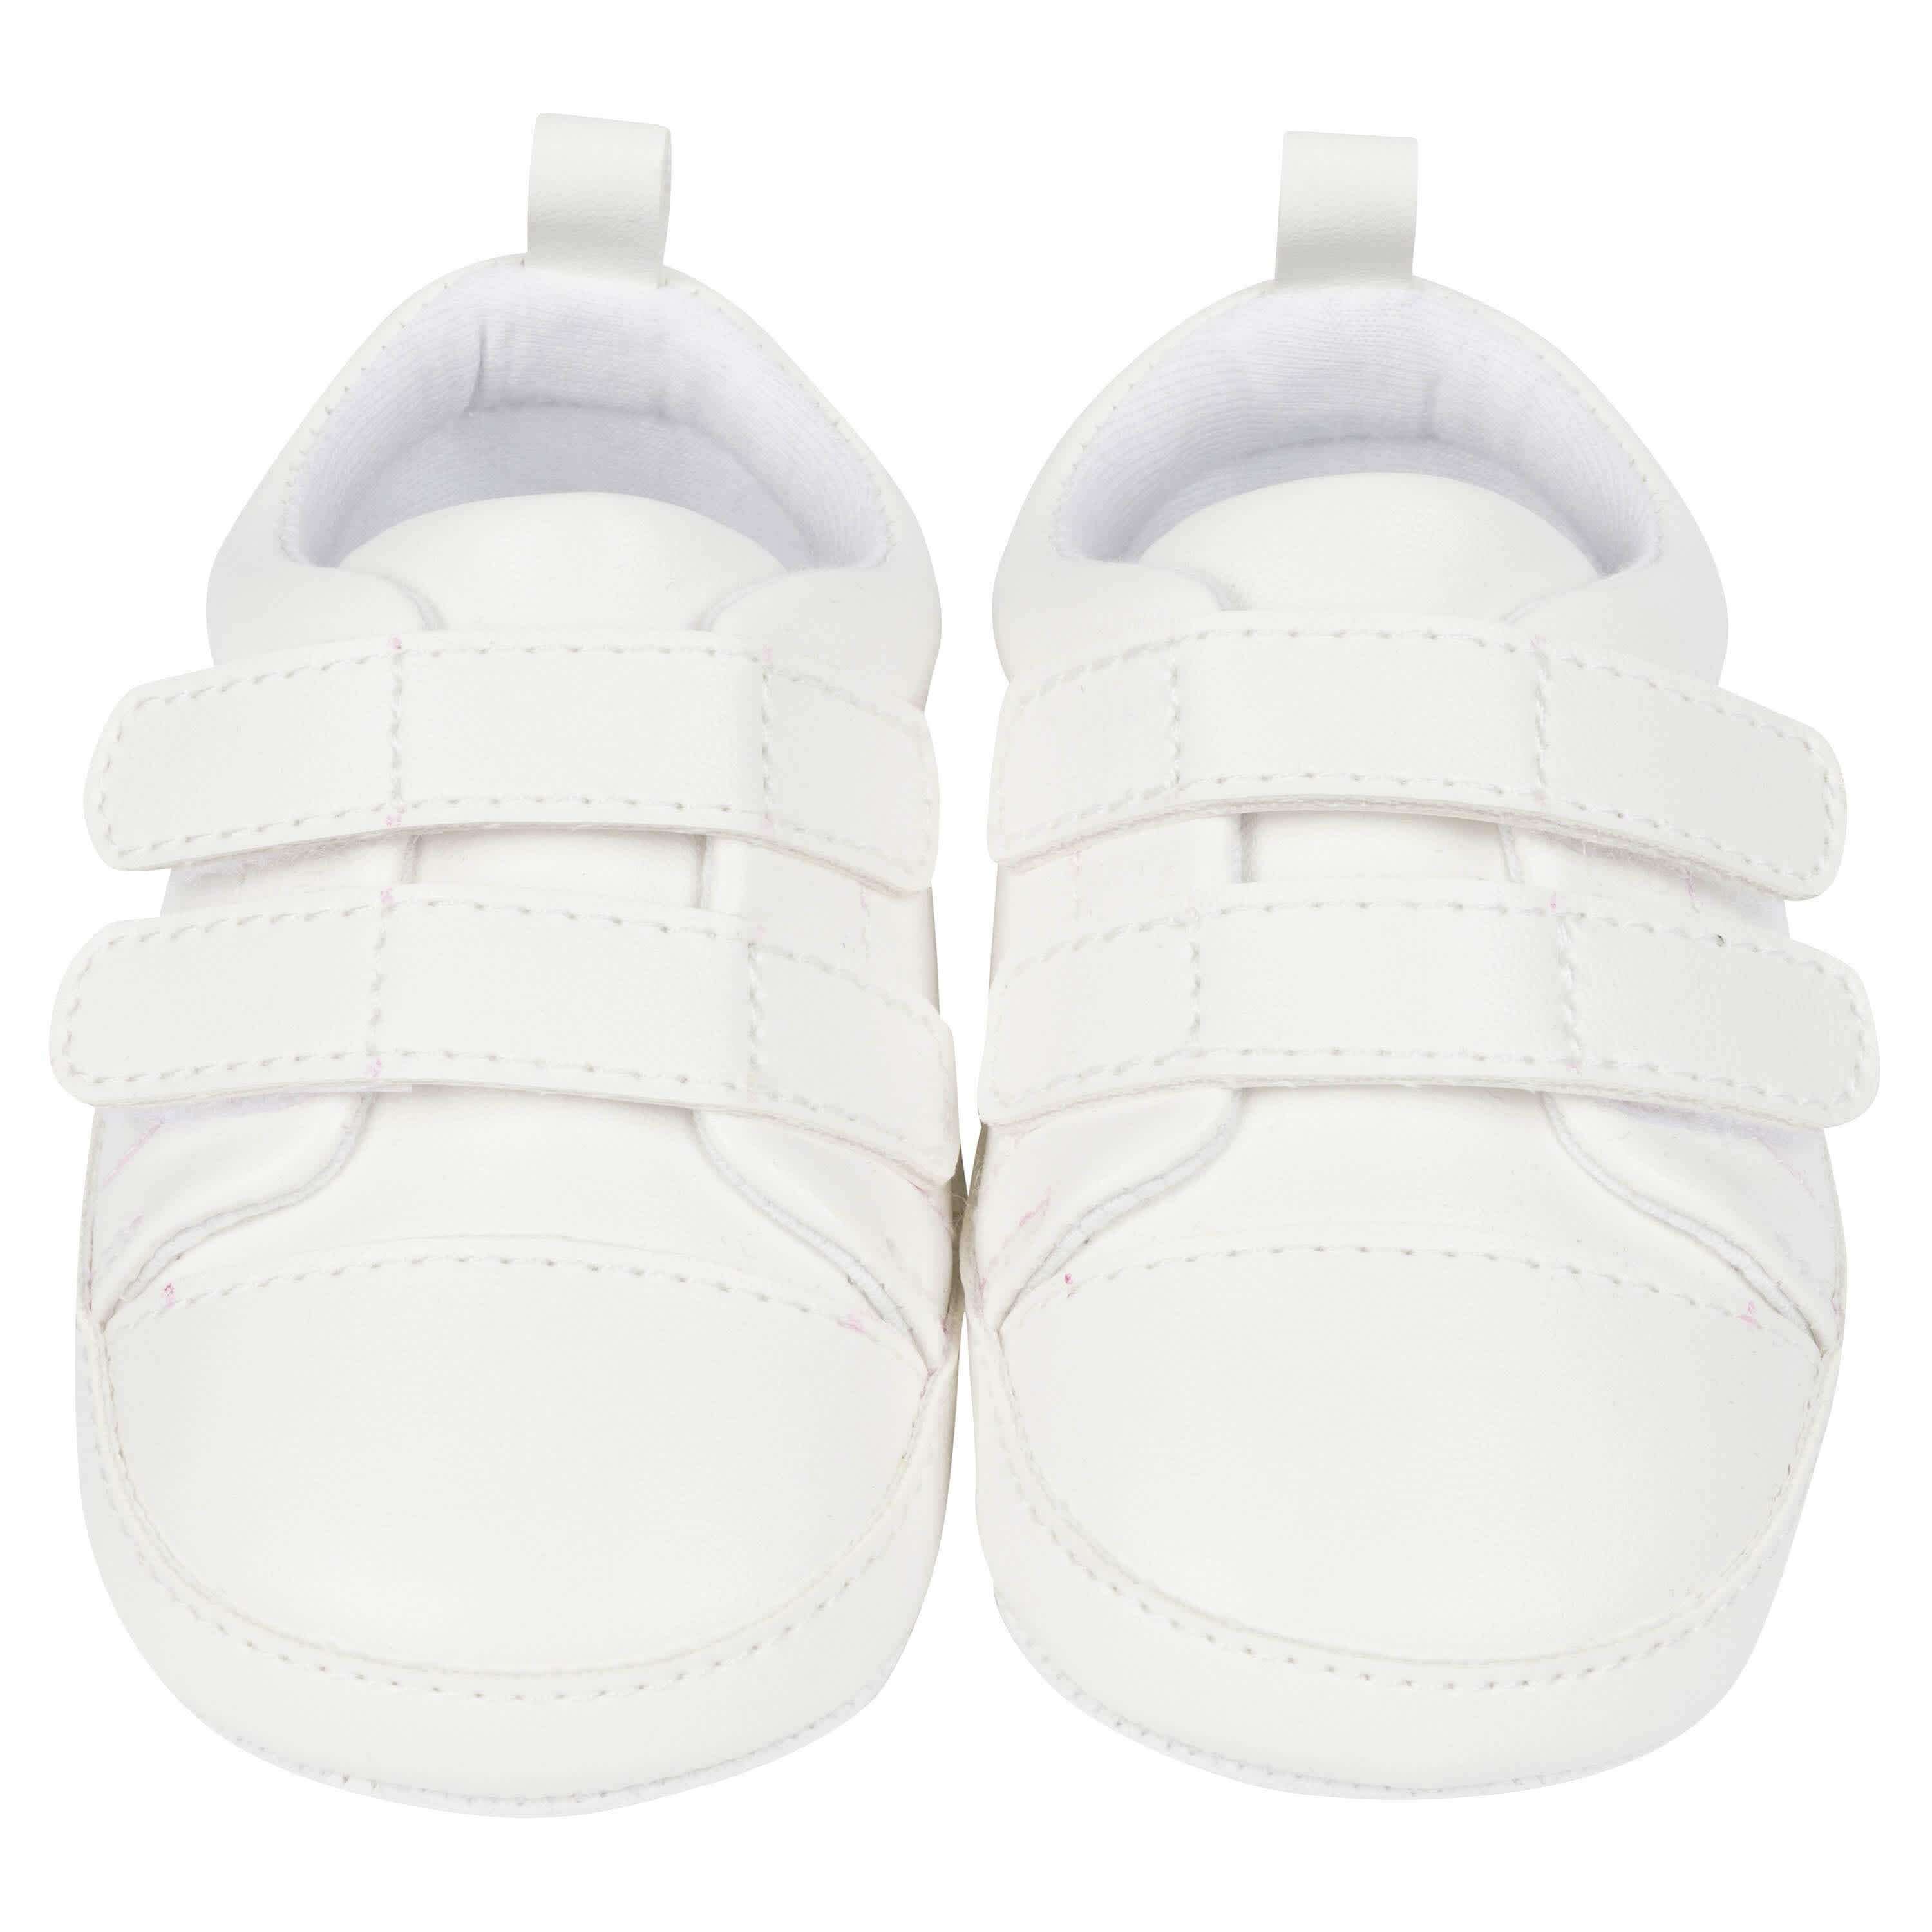 Aggregate 204+ baby sneakers white